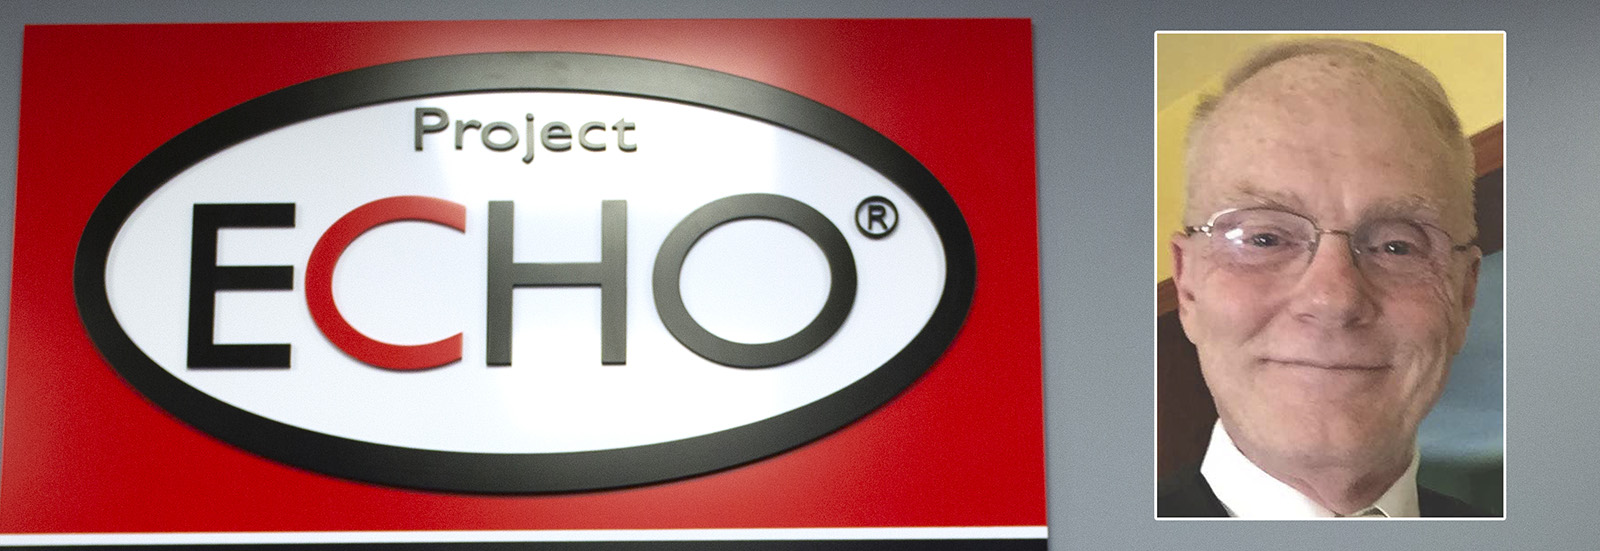 Project ECHO banner is shown with a photo of Bill Williams to the right